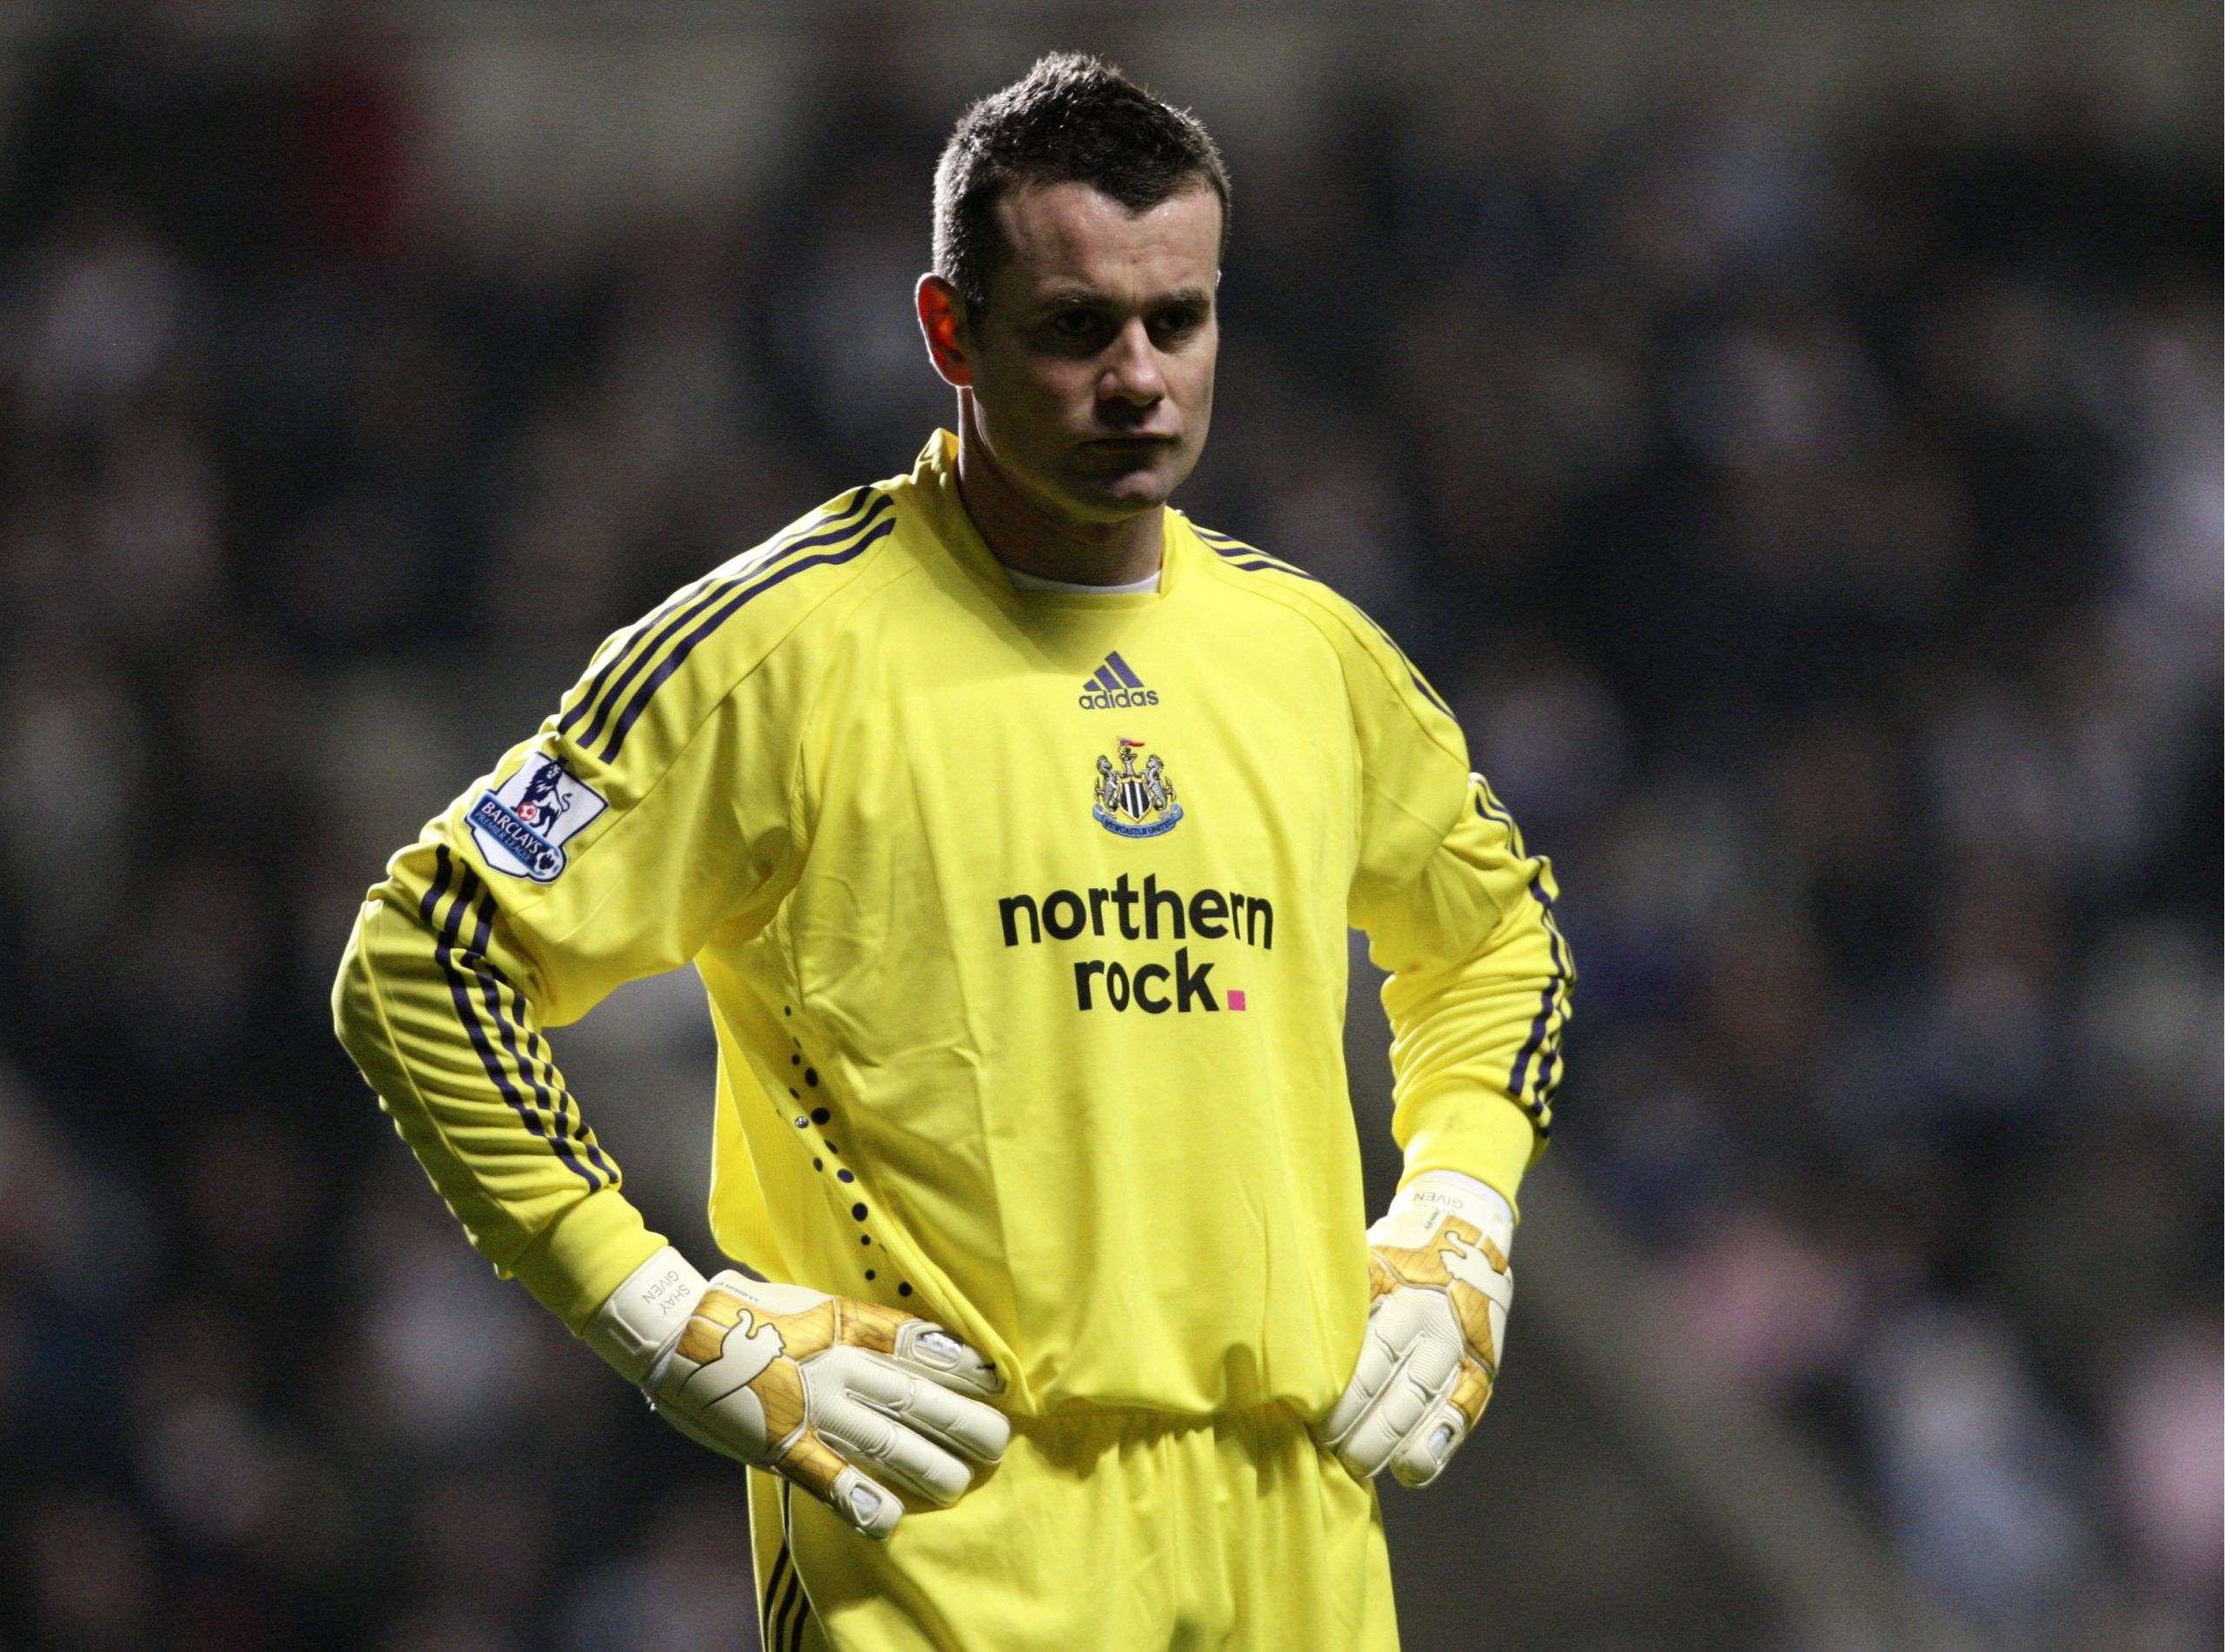 Football - Stock - 08/09 - 14/1/09 
Shay Given - Newcastle United  
Mandatory Credit: Action Images / Lee Smith